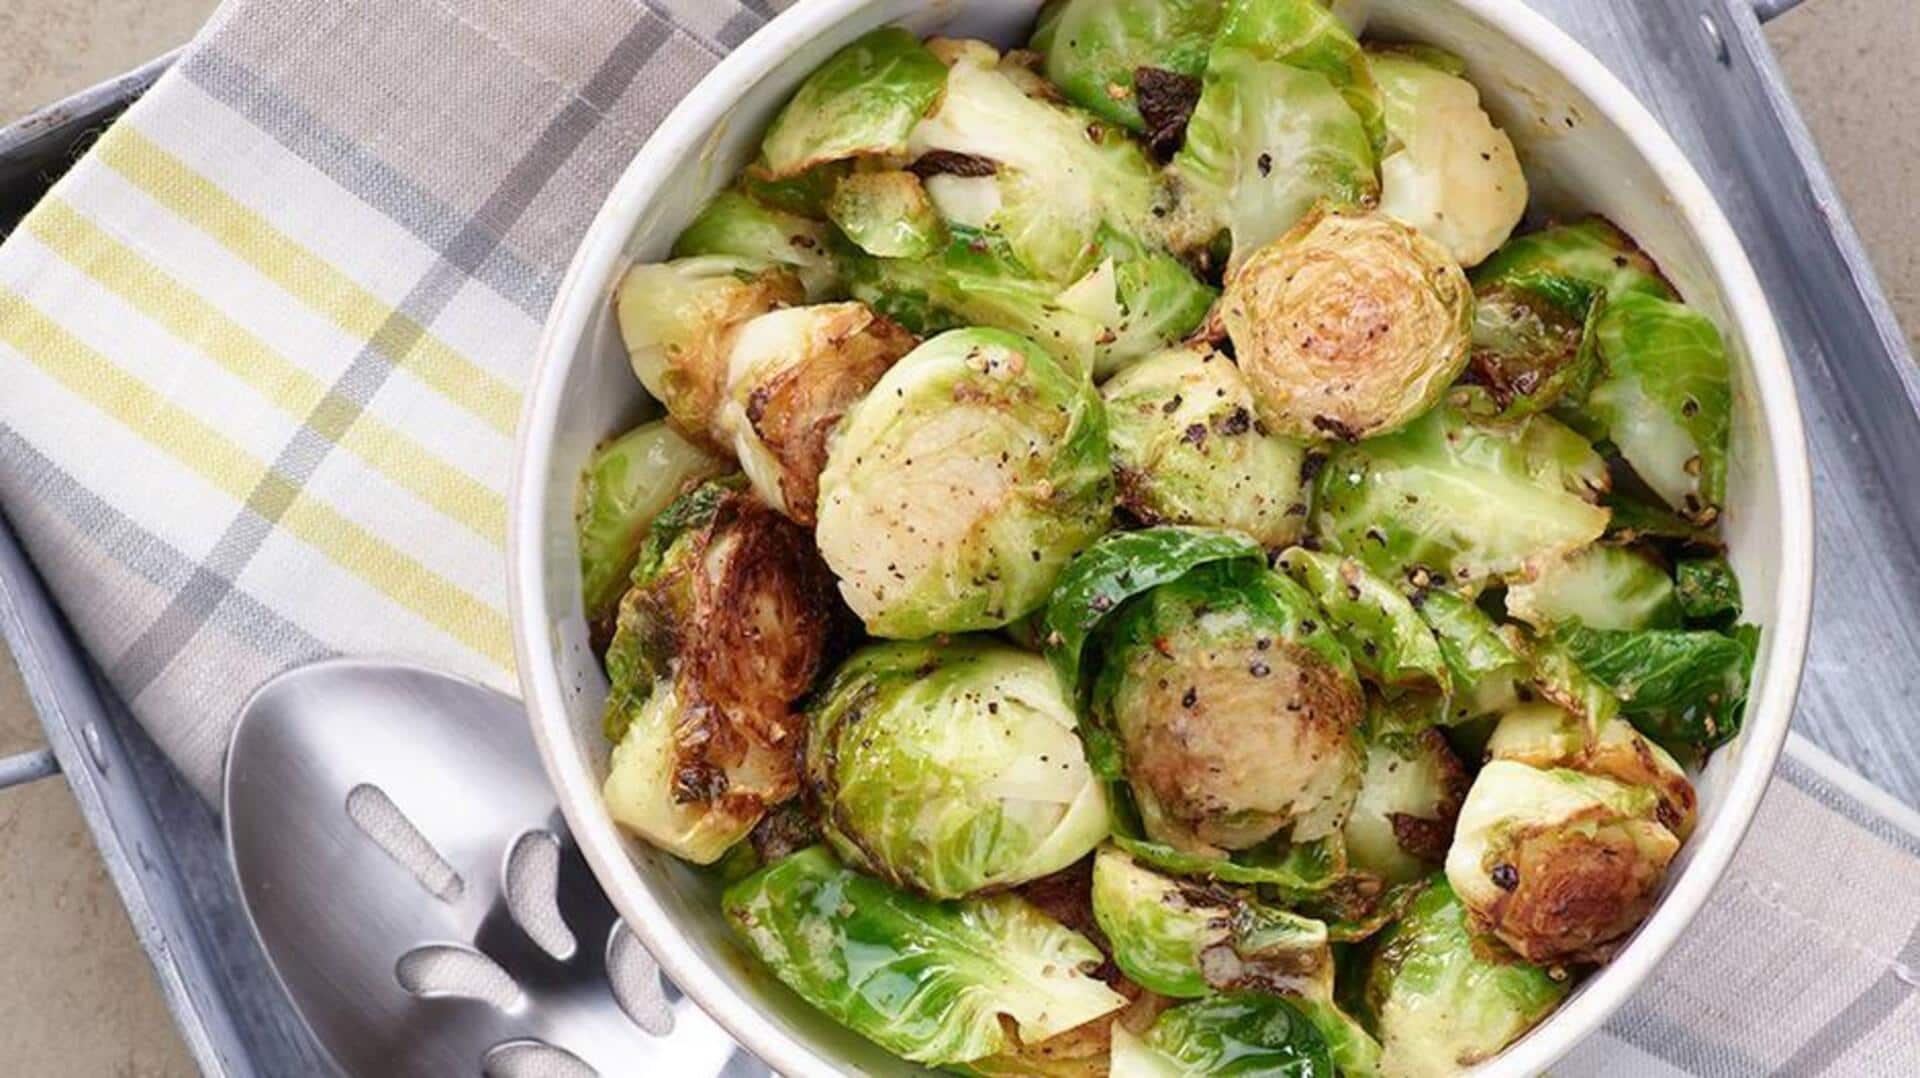 Simple steps to cook crispy, lemon-roasted Brussels sprouts at home